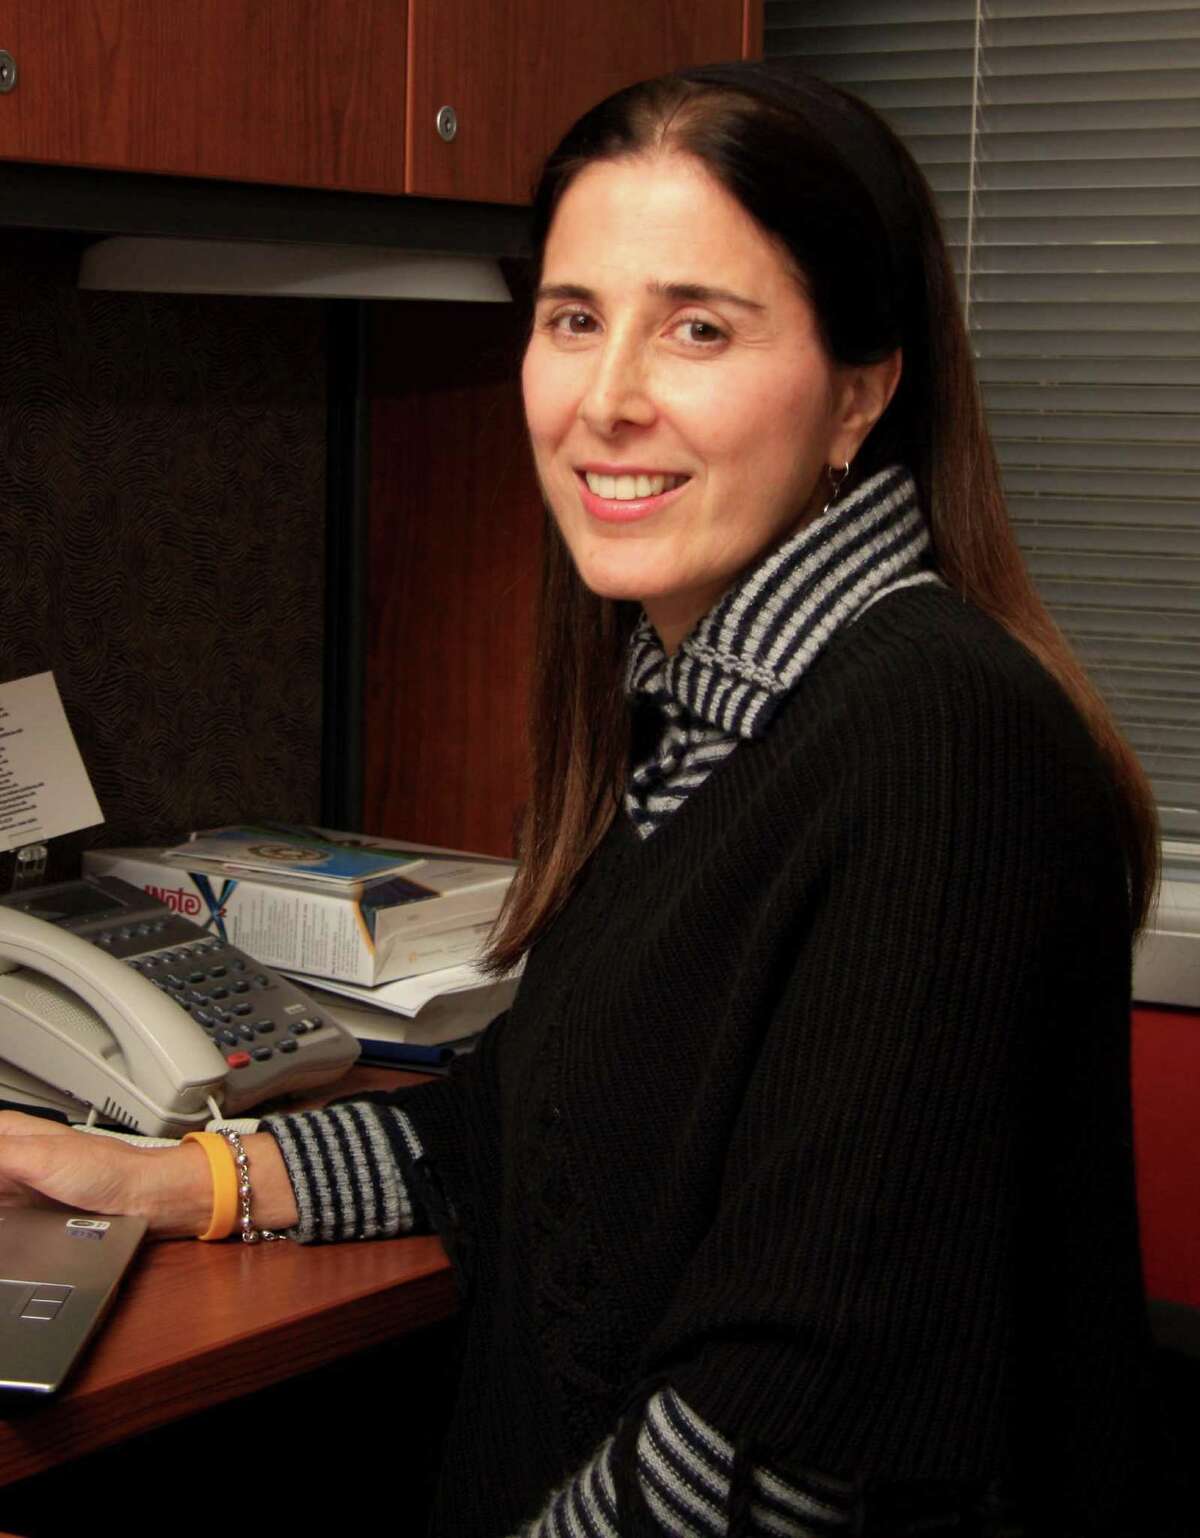 Patricia Chalela, assistant professor of epidemiology and biostatistics at the Institute for Health Promotion Research at The University of Texas Health Science Center at San Antonio.